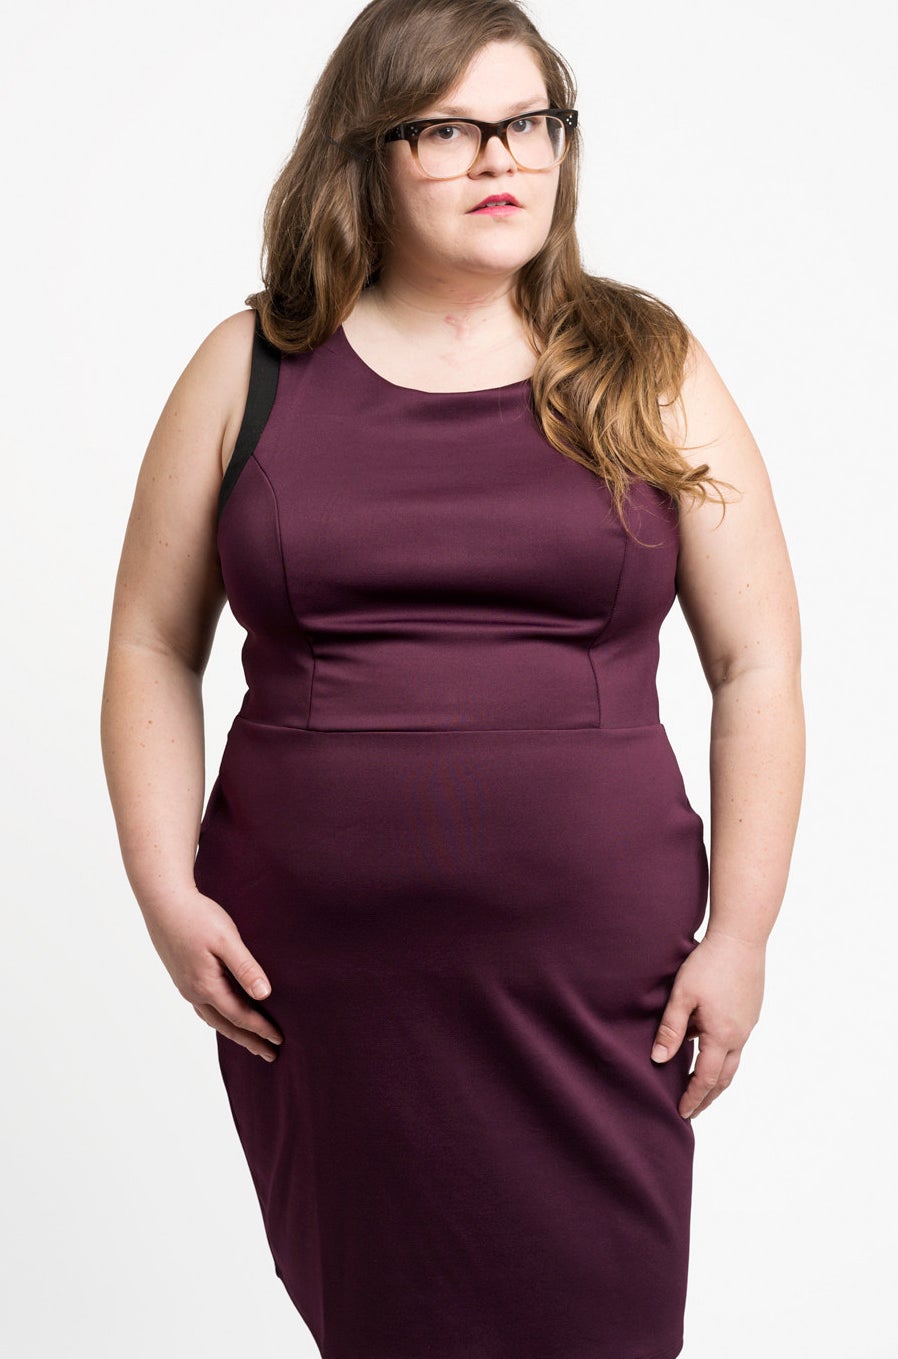 astronomi En sætning Røg This Is What Plus-Size Clothes Look Like On Plus-Size Women